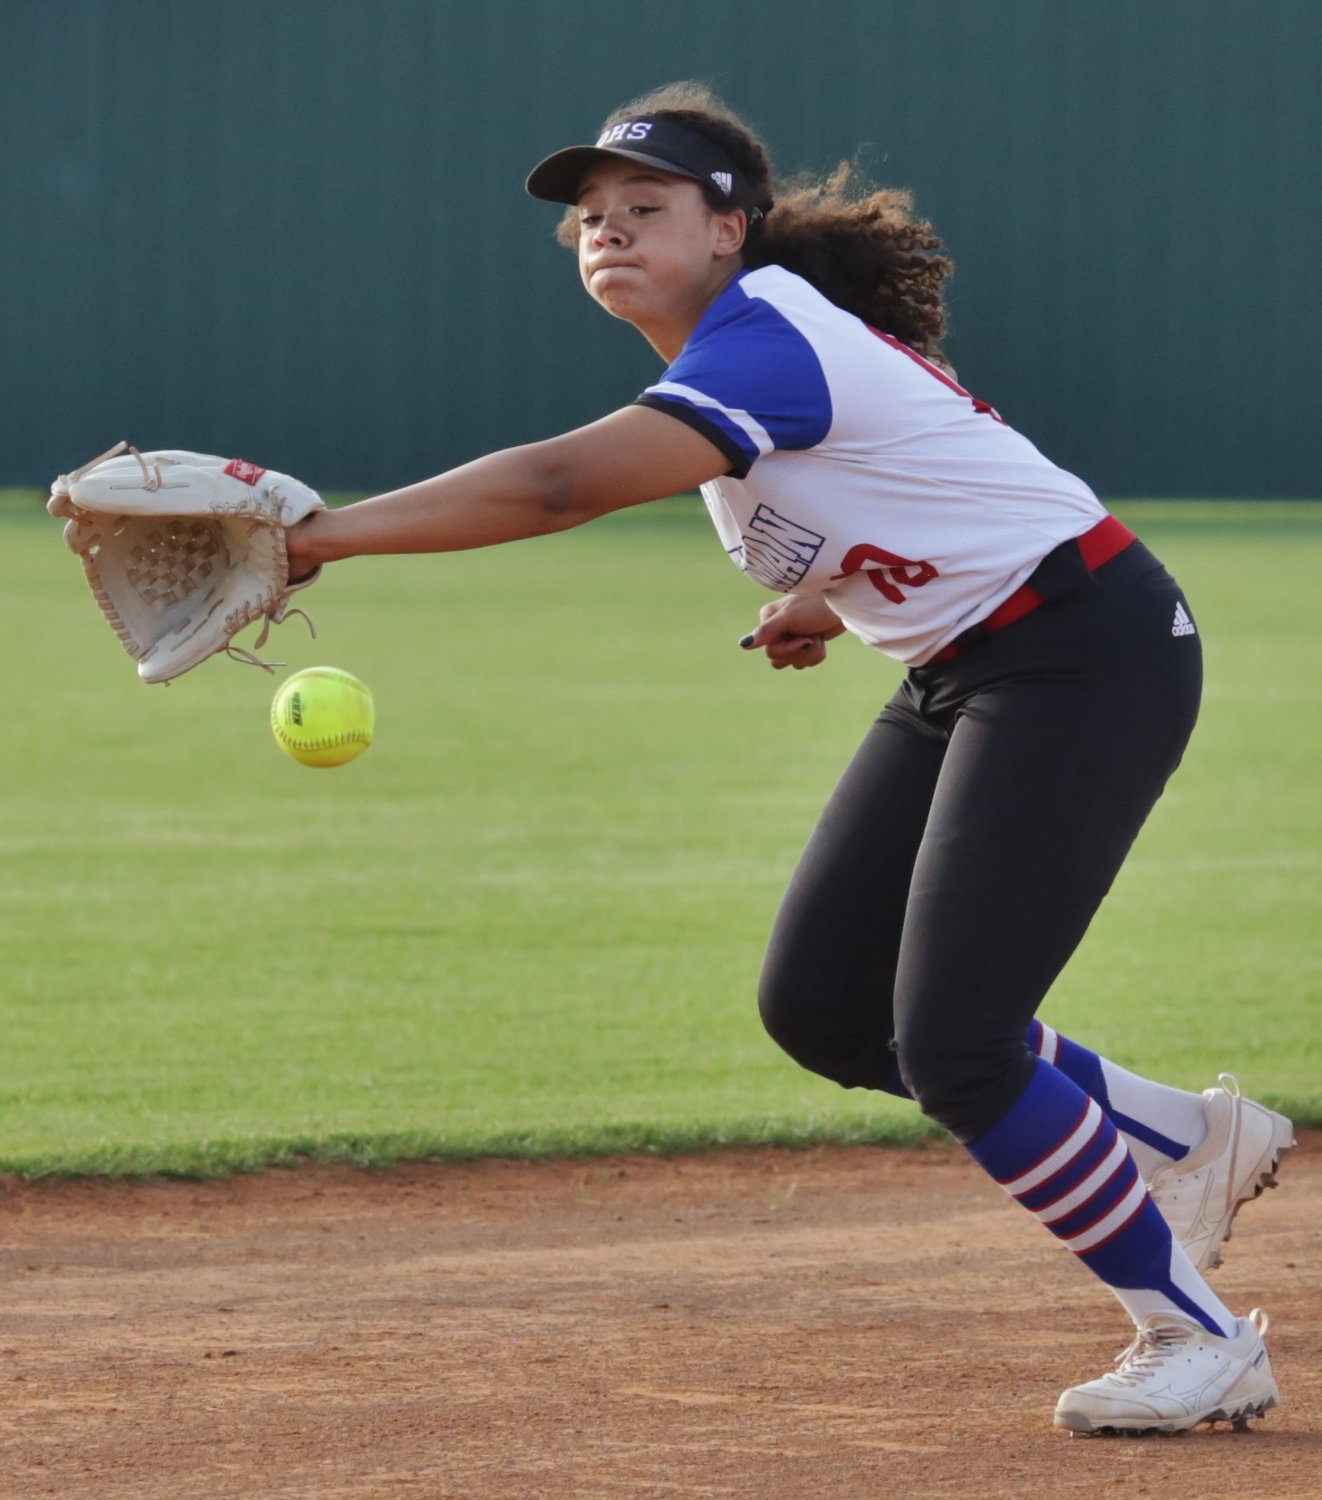 Lady Bulldog Ashley Davis makes a play on a ball in the fifth inning against Winnsboro. Davis had a good night at third base, accounting for three put-outs and triggering a double play.